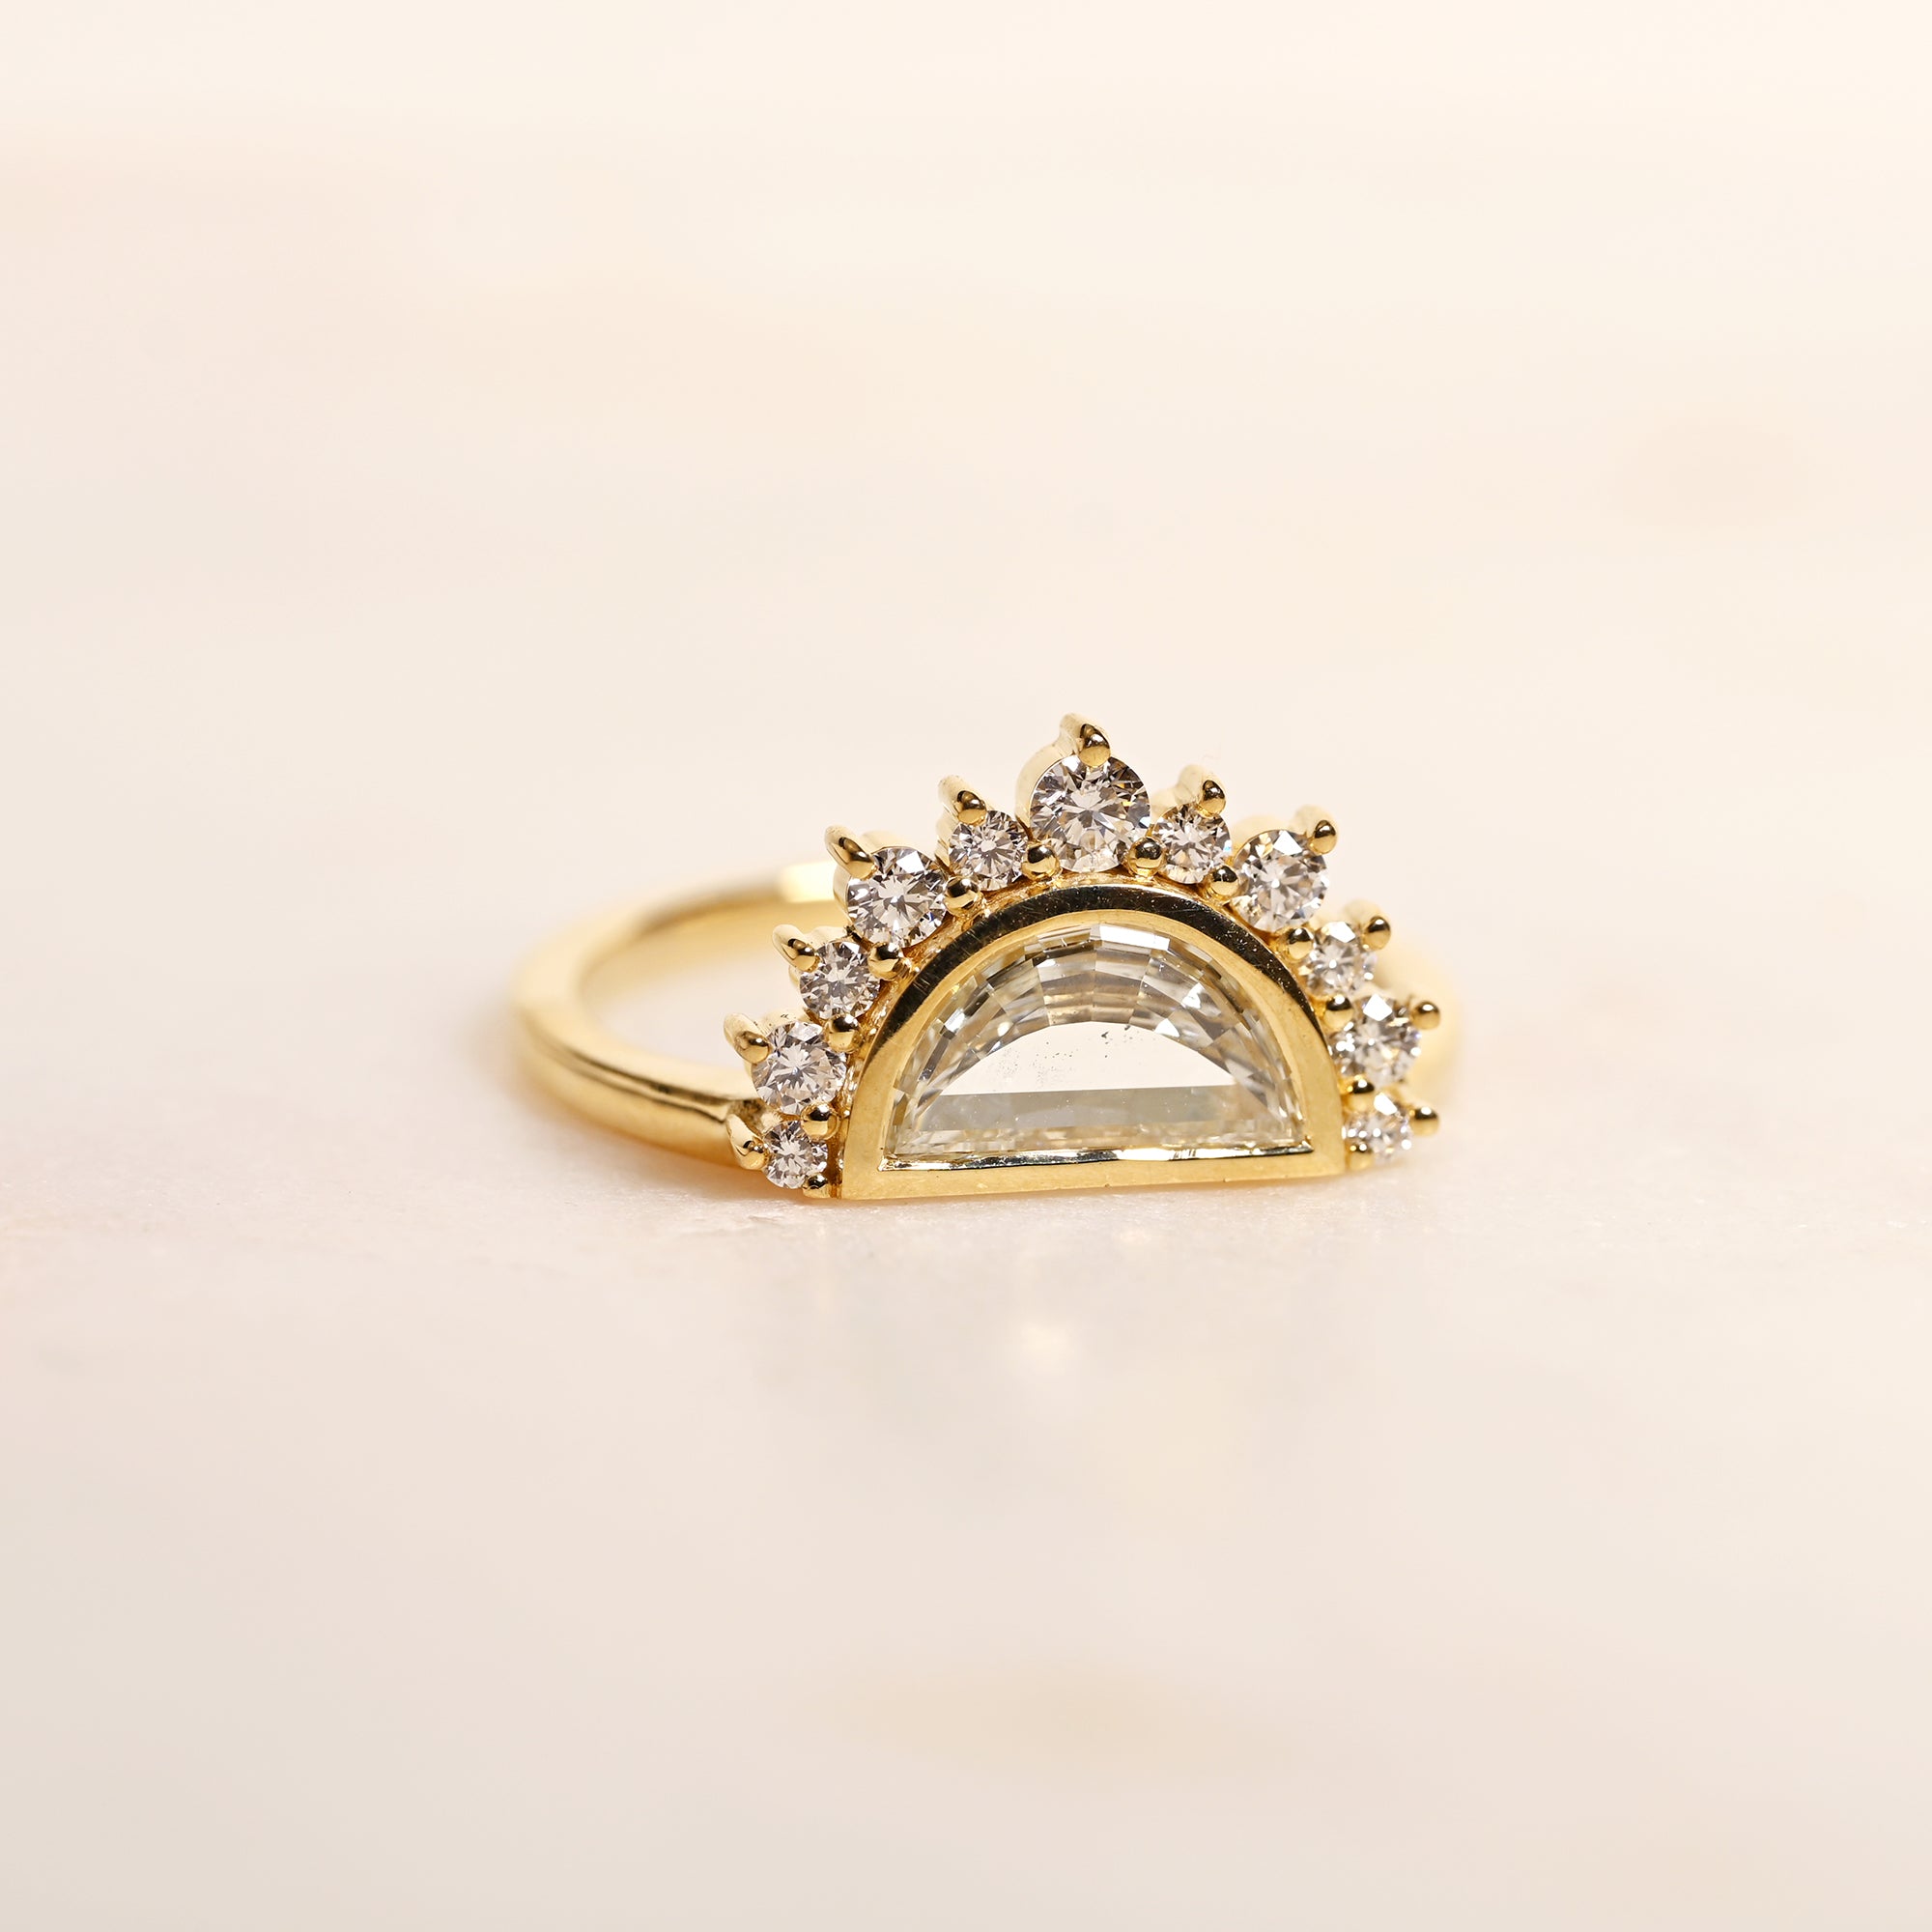 Half moon diamond engagement ring in a unique 14k yellow gold halo setting